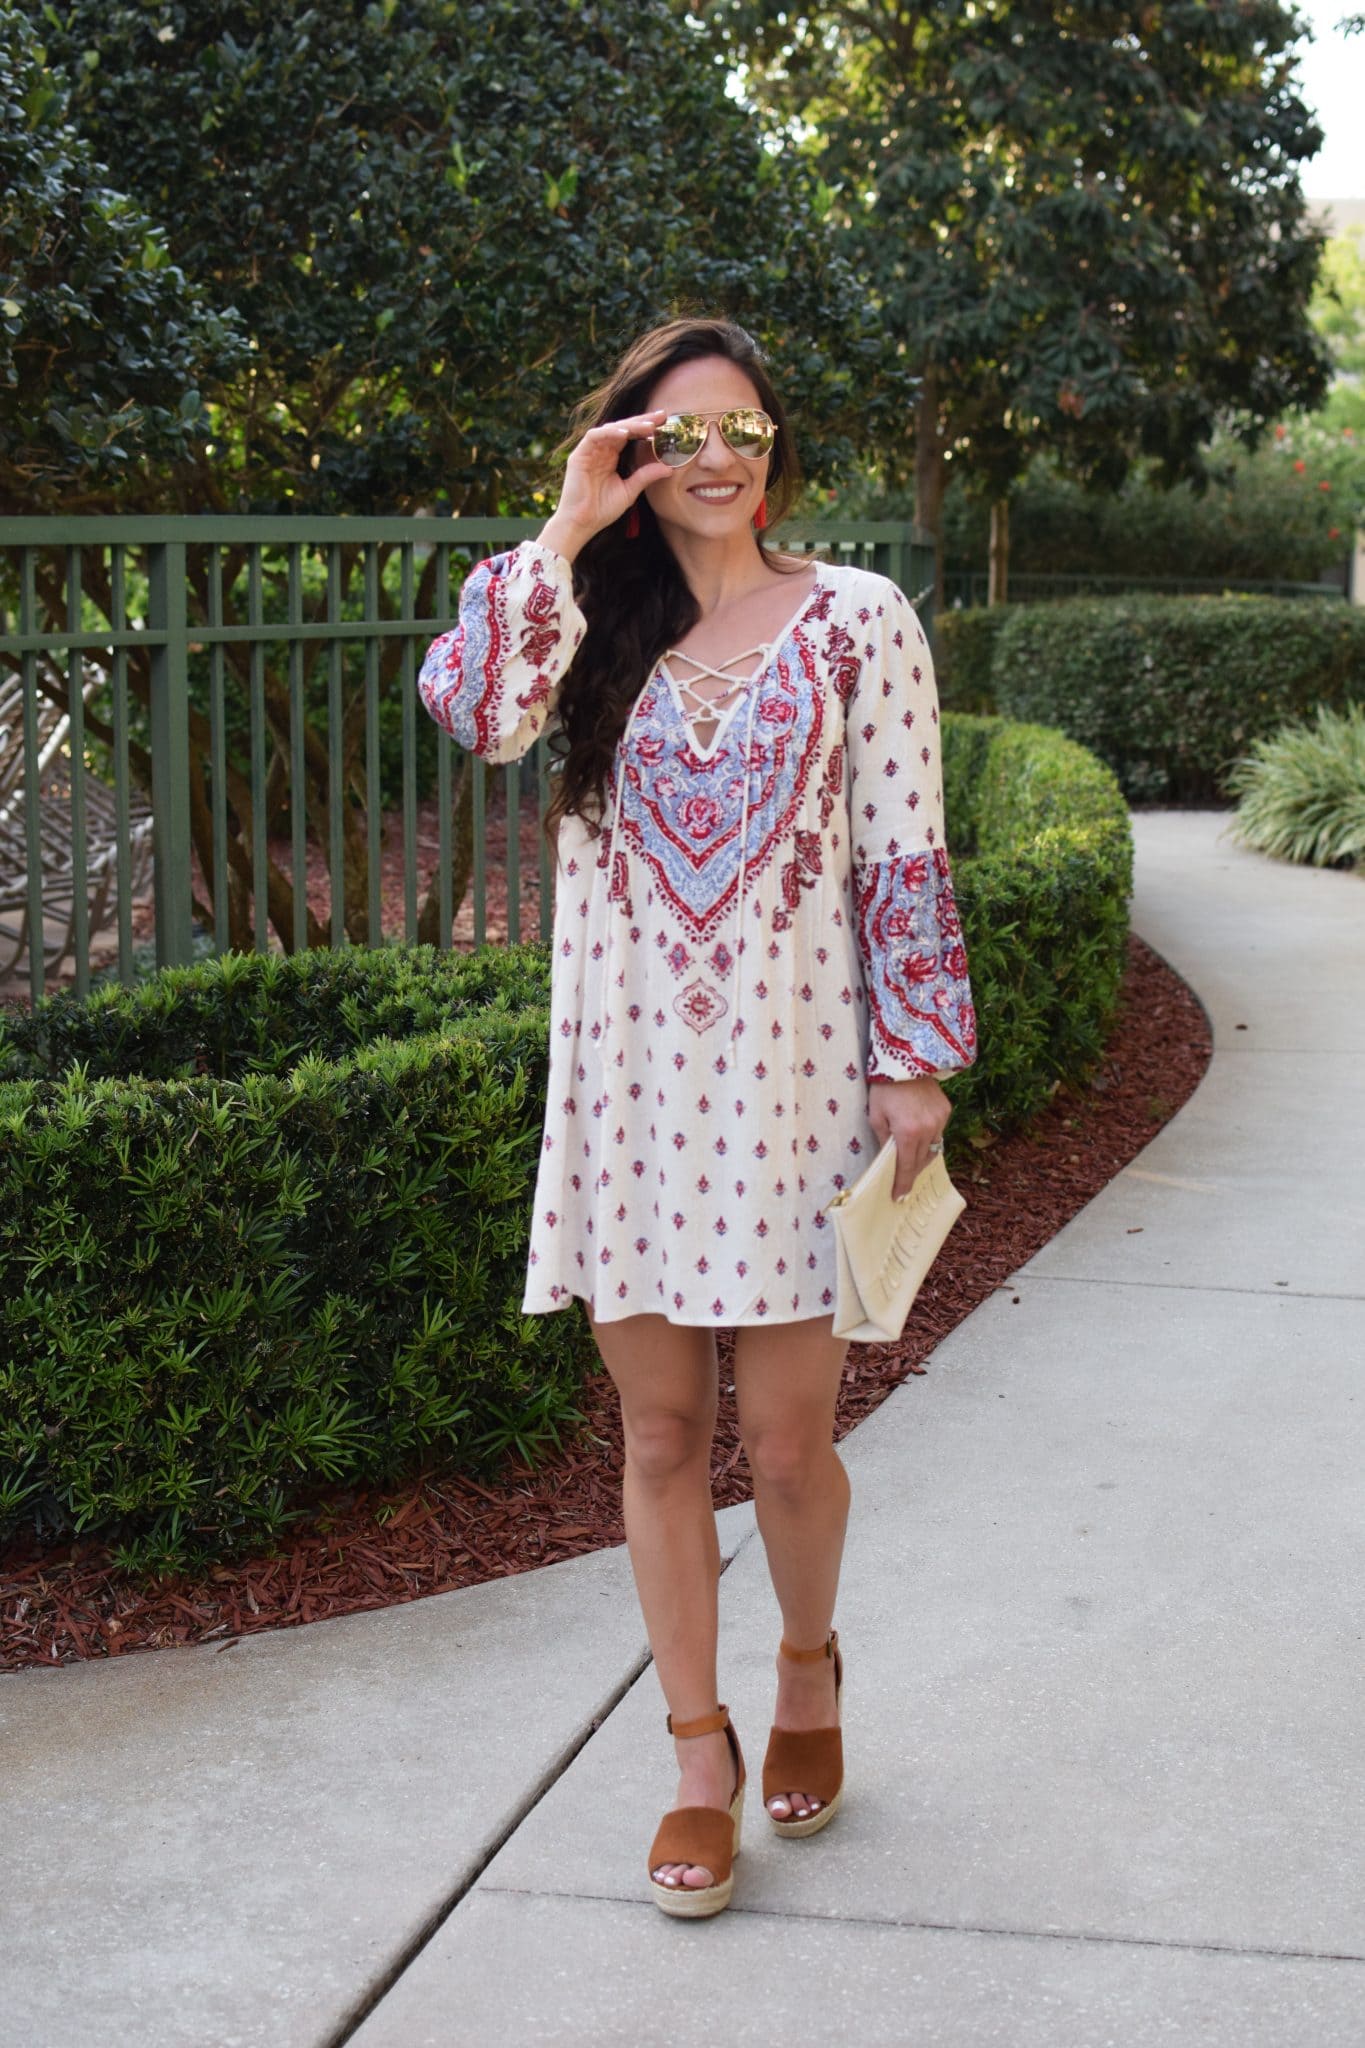 billabong dress - Our Stay at Orlando World Center Marriott by popular New Jersey travel blogger Fit Mommy in Heels